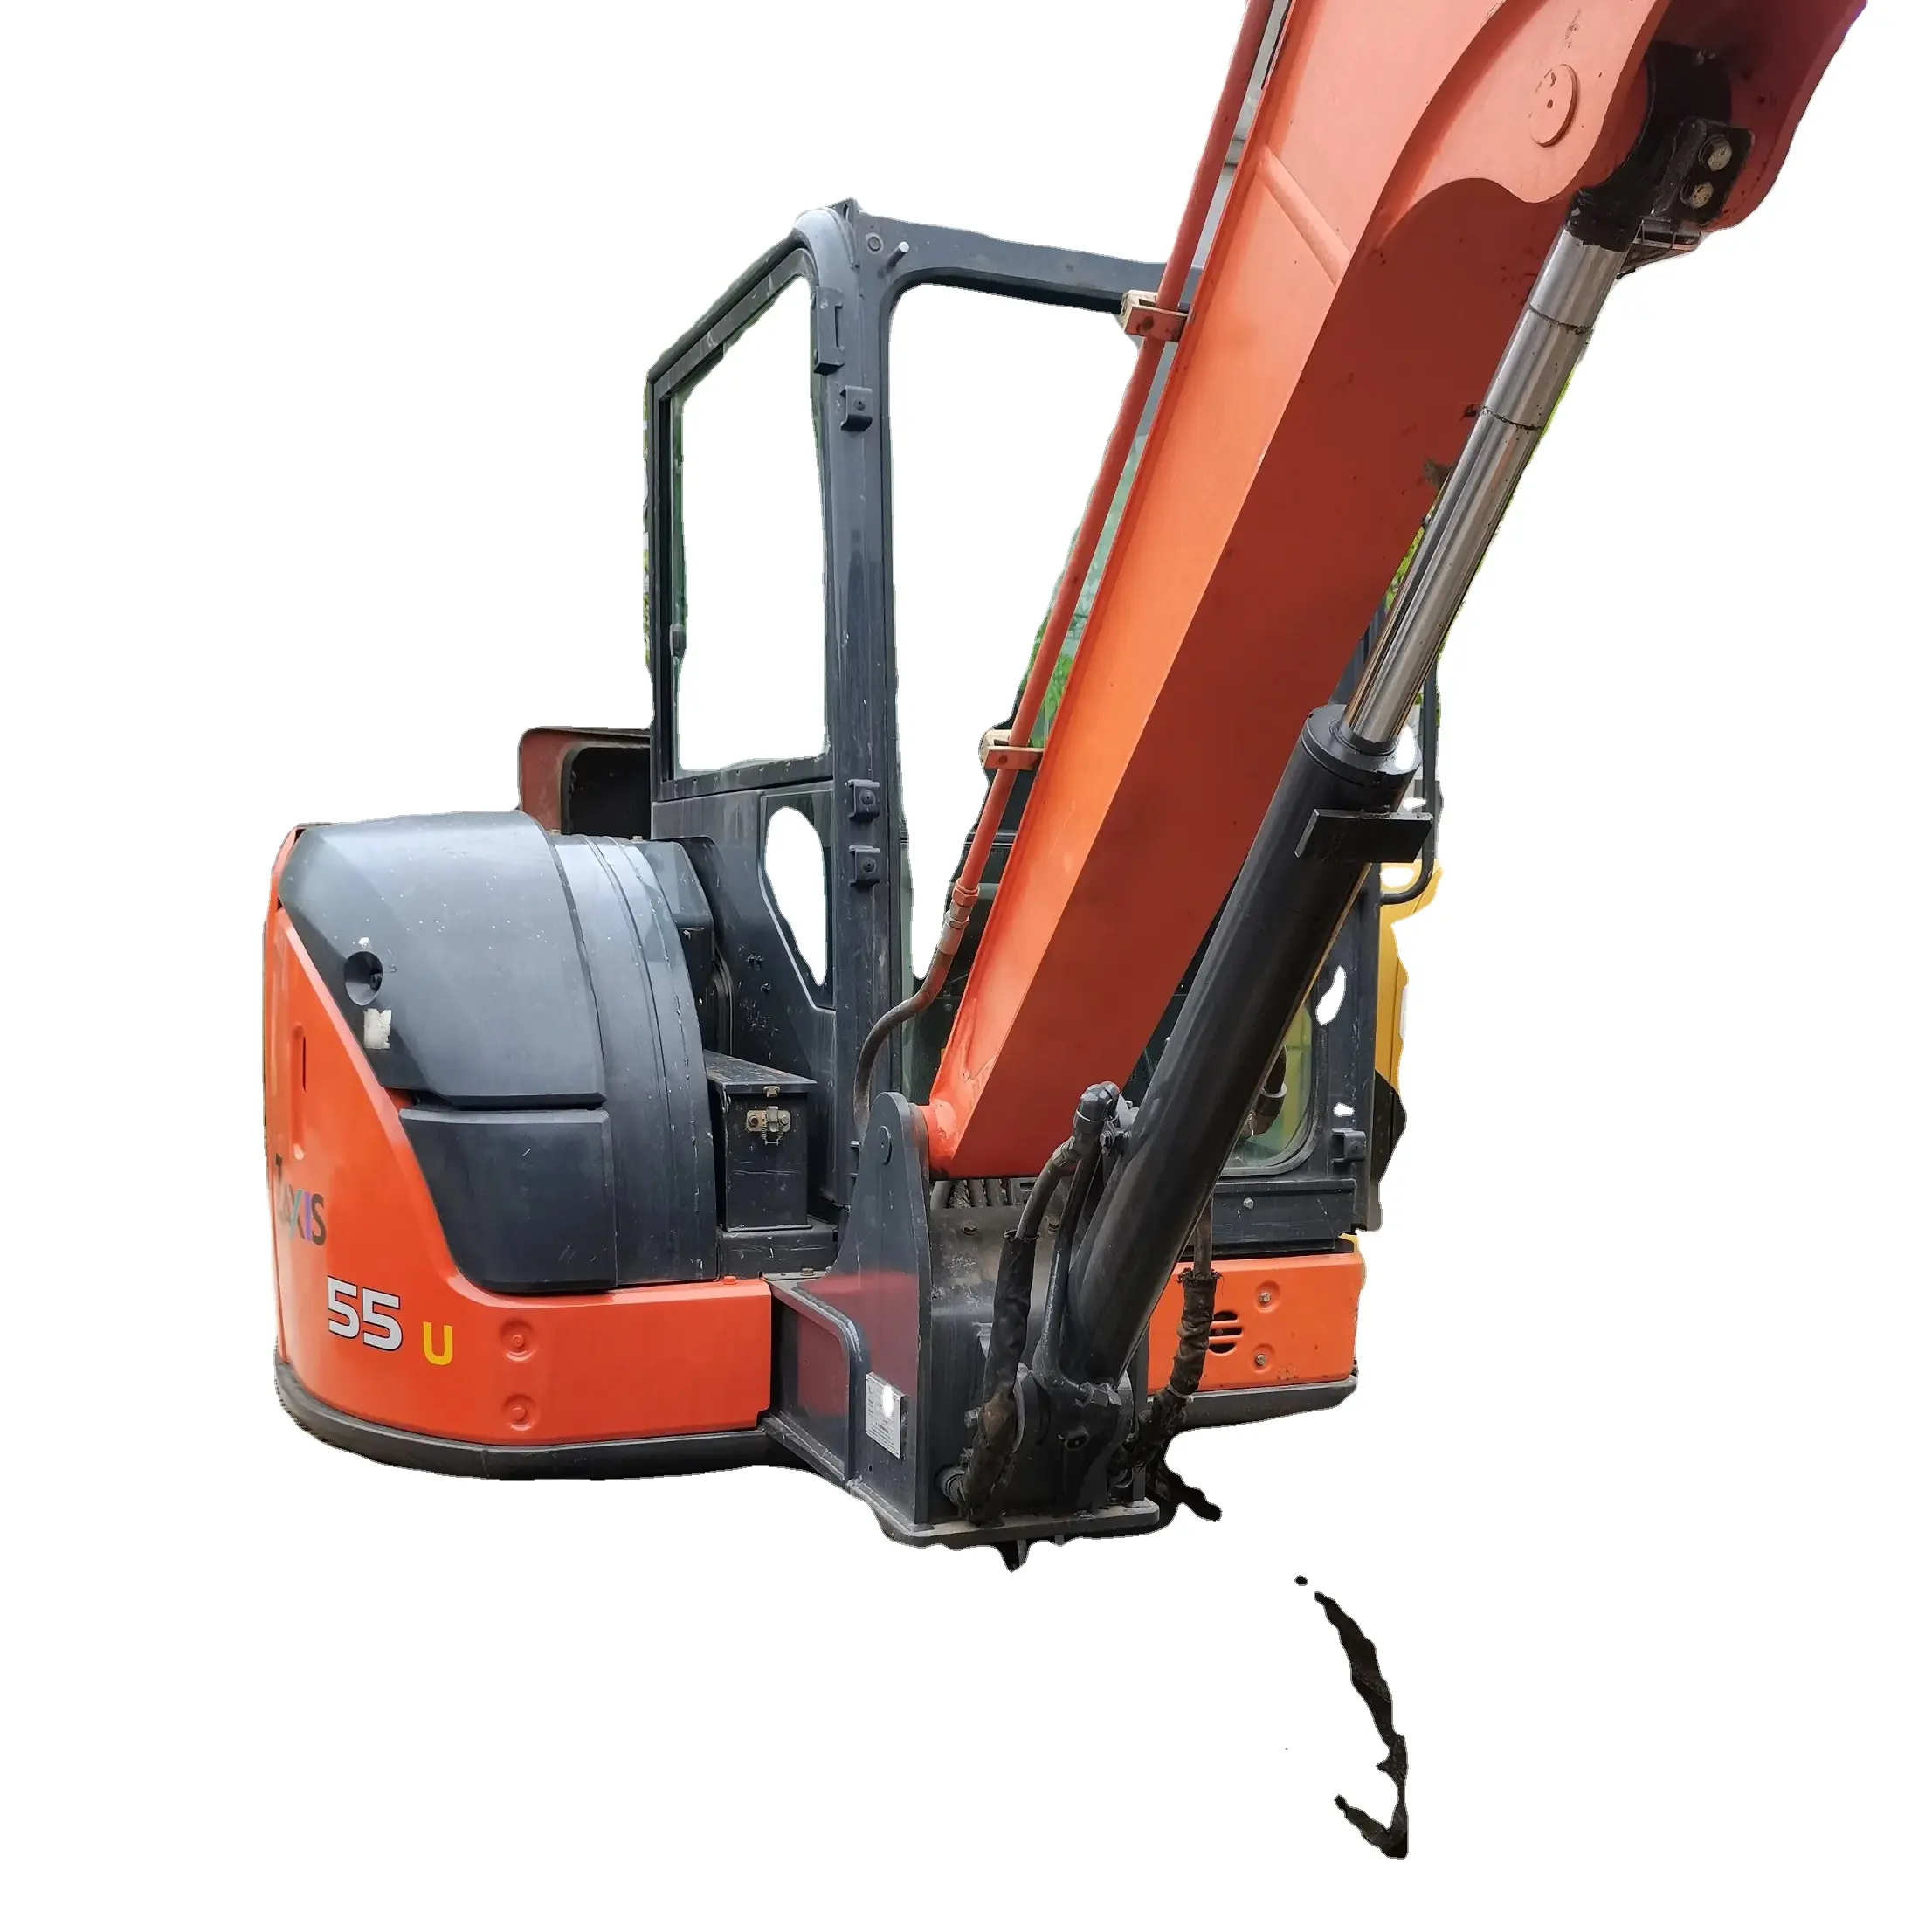 Hitachi used Crawler excavator, hydraulic excavator hitachi 55 in good condition with low working hours in Shanghai